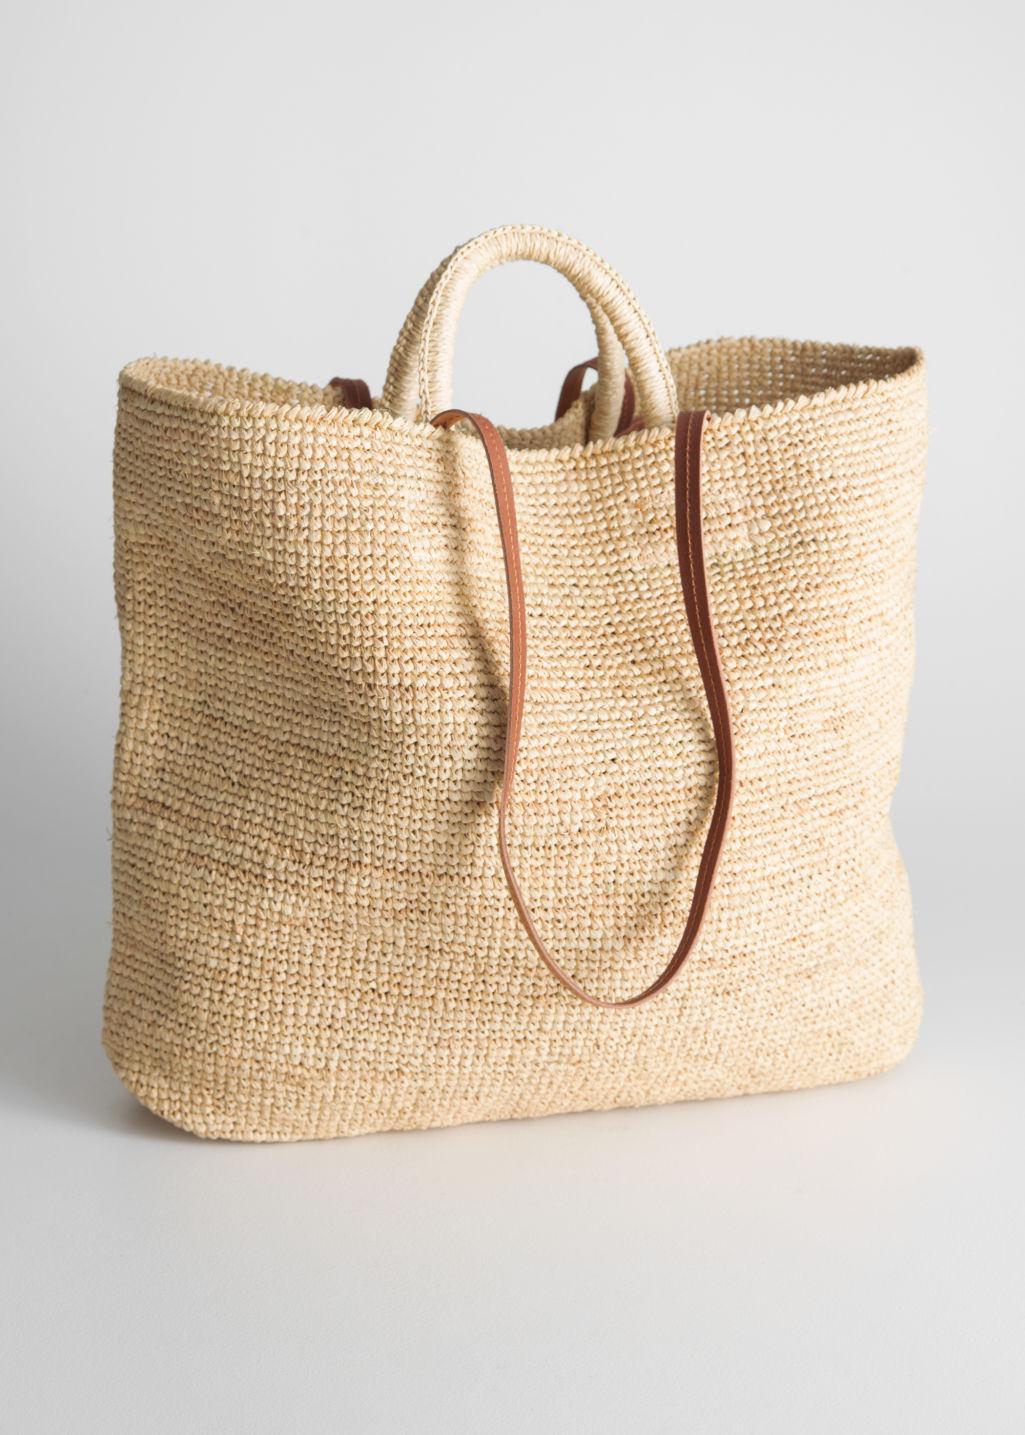 & Other Stories Woven Straw Bag in Natural | Lyst